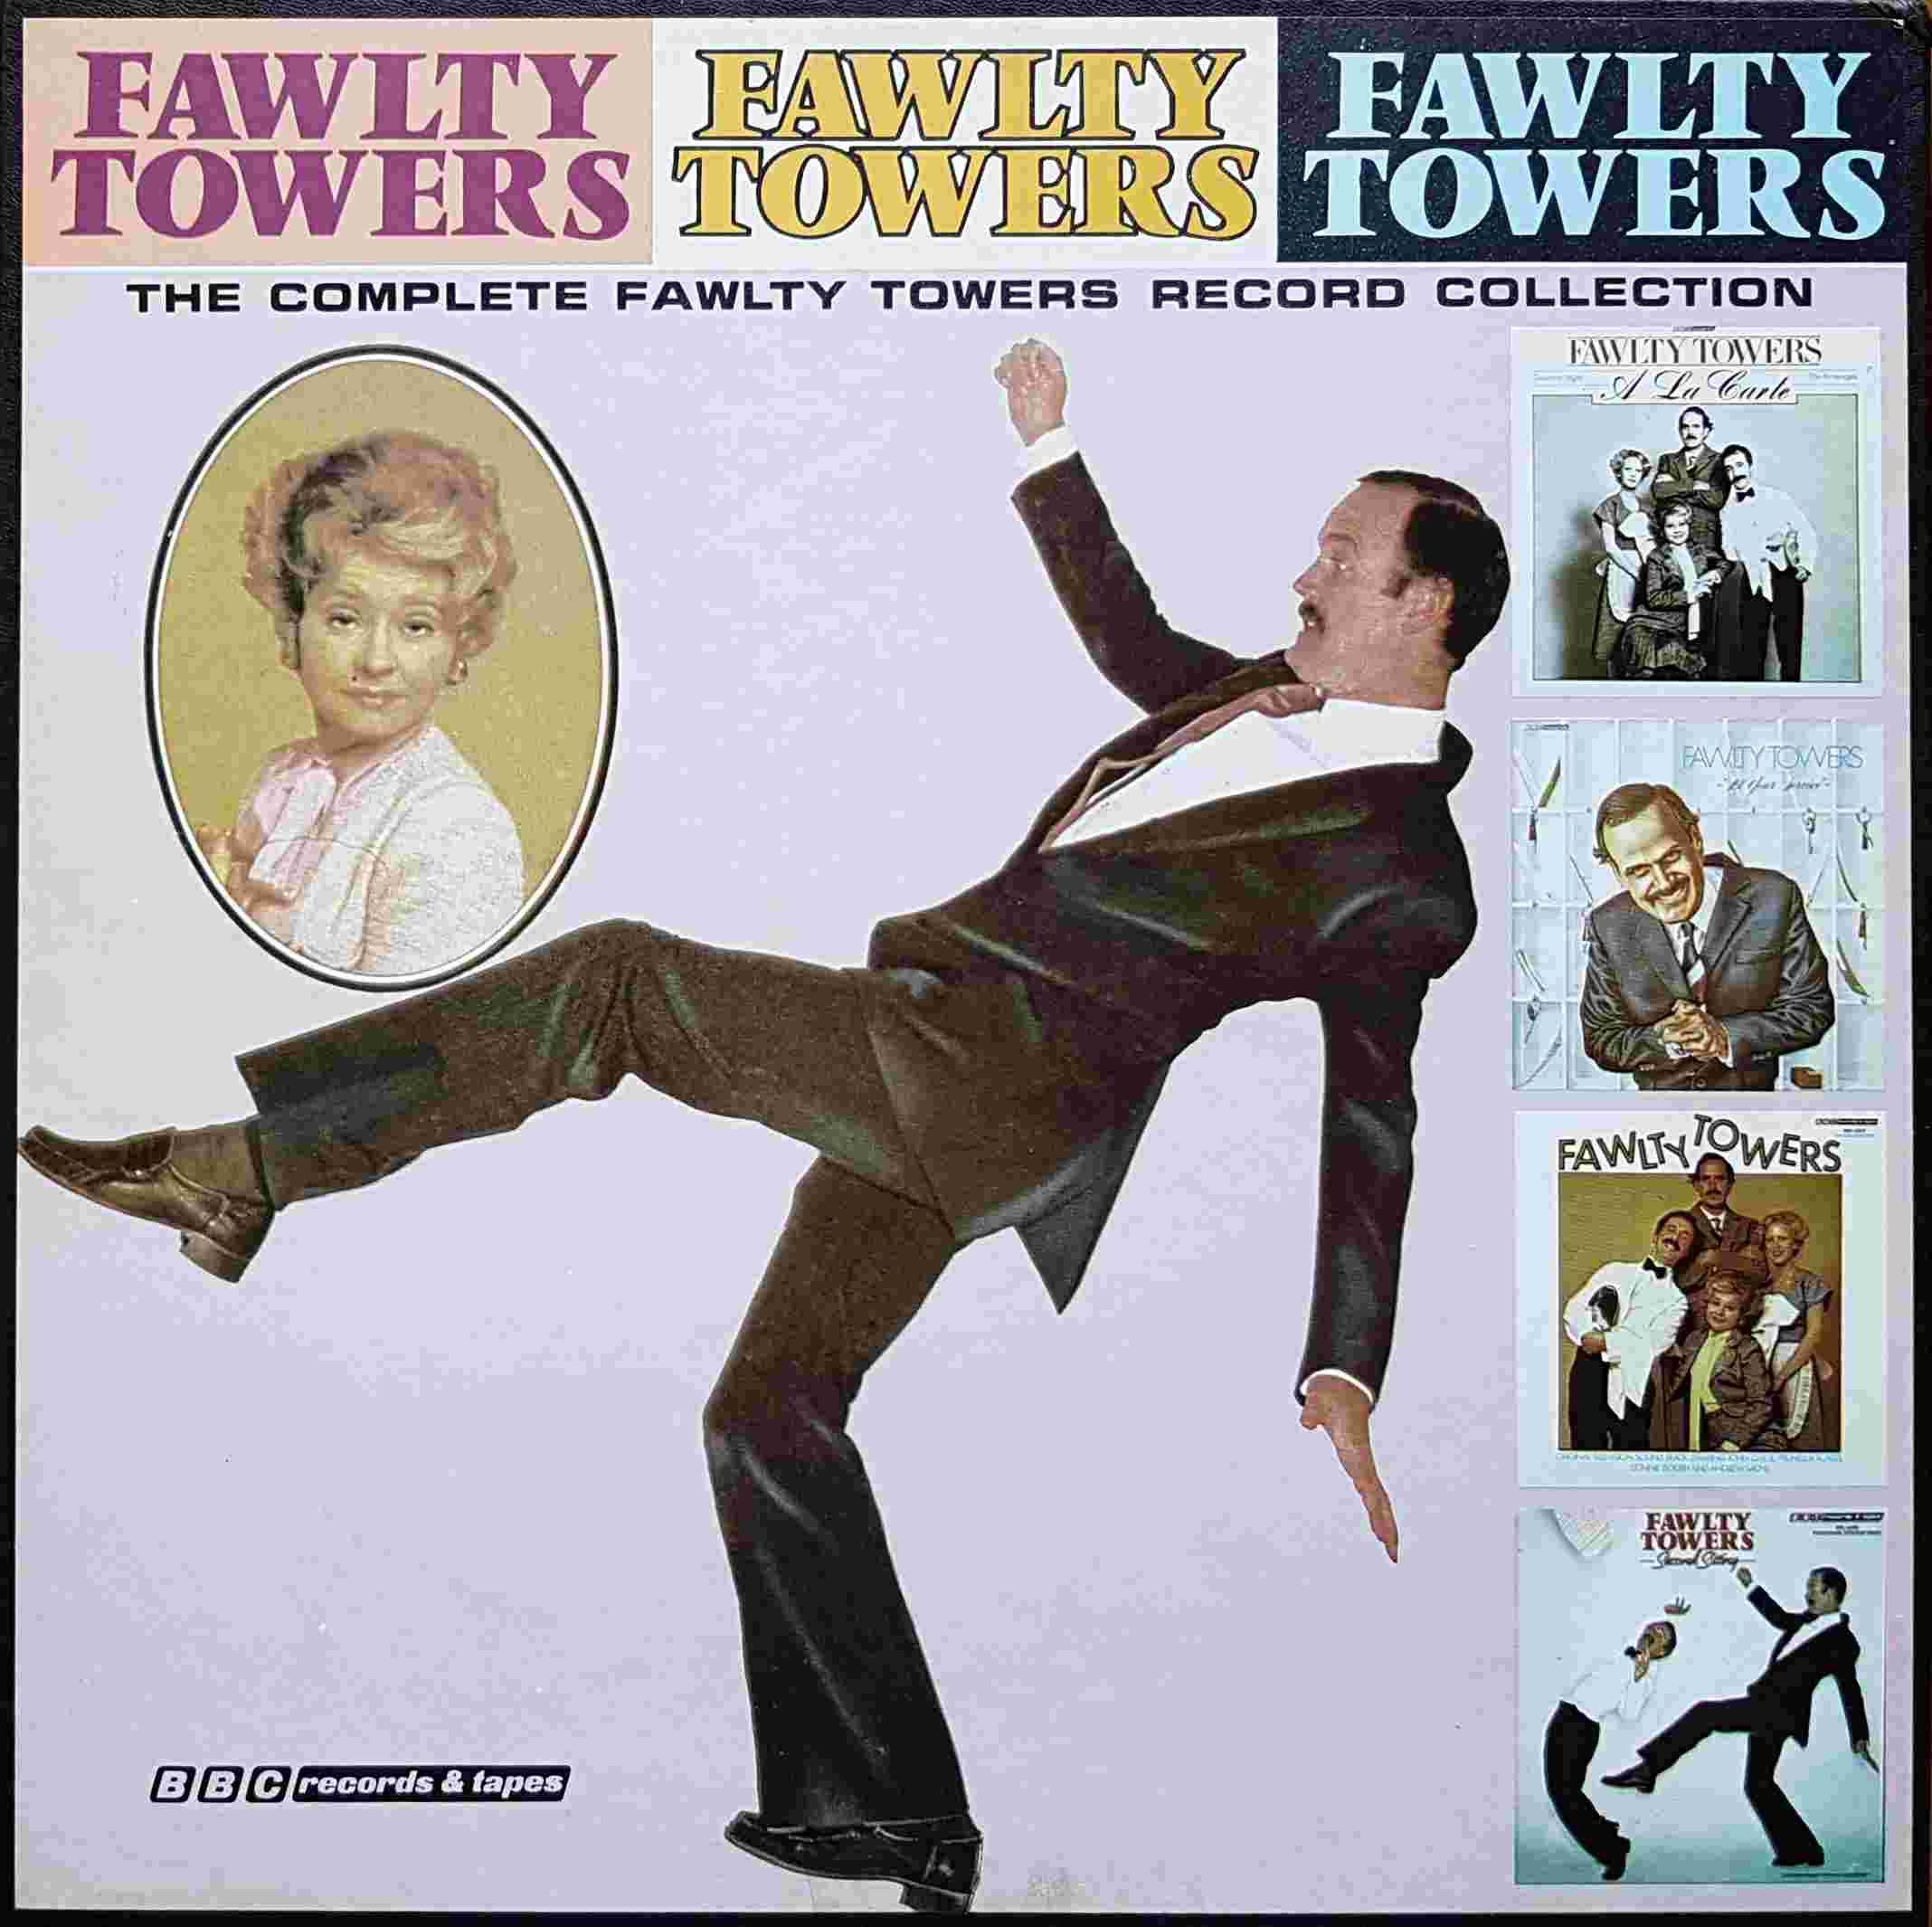 Picture of BBC - 22003 The Complete Fawlty Towers Record Collection (US import) by artist John Cleese / Connie Booth from the BBC albums - Records and Tapes library